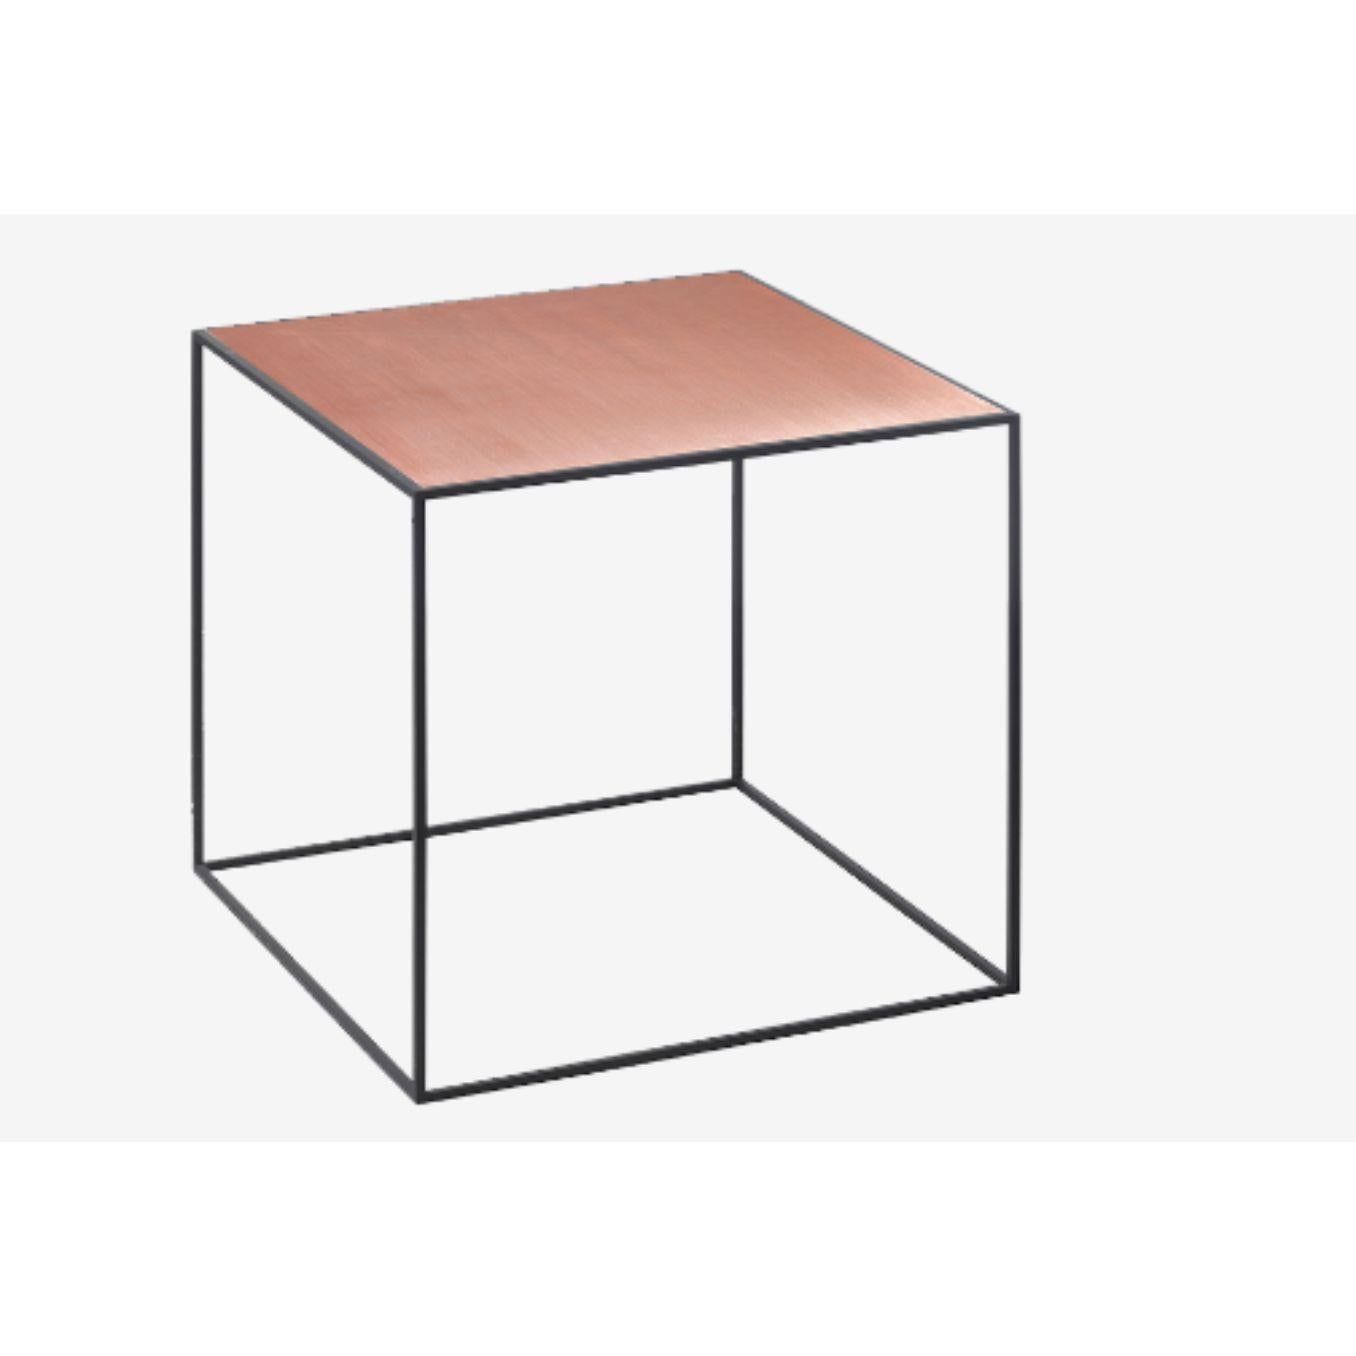 42 copper twin table by Lassen
Dimensions: W 42 x D 42 x H 0.5 cm 
Materials: Finér, melamin, melamin, melamine, metal, veneer, oak
Also available in different colours and dimensions. 

With an uncomplicated simplicity and a fond reference to